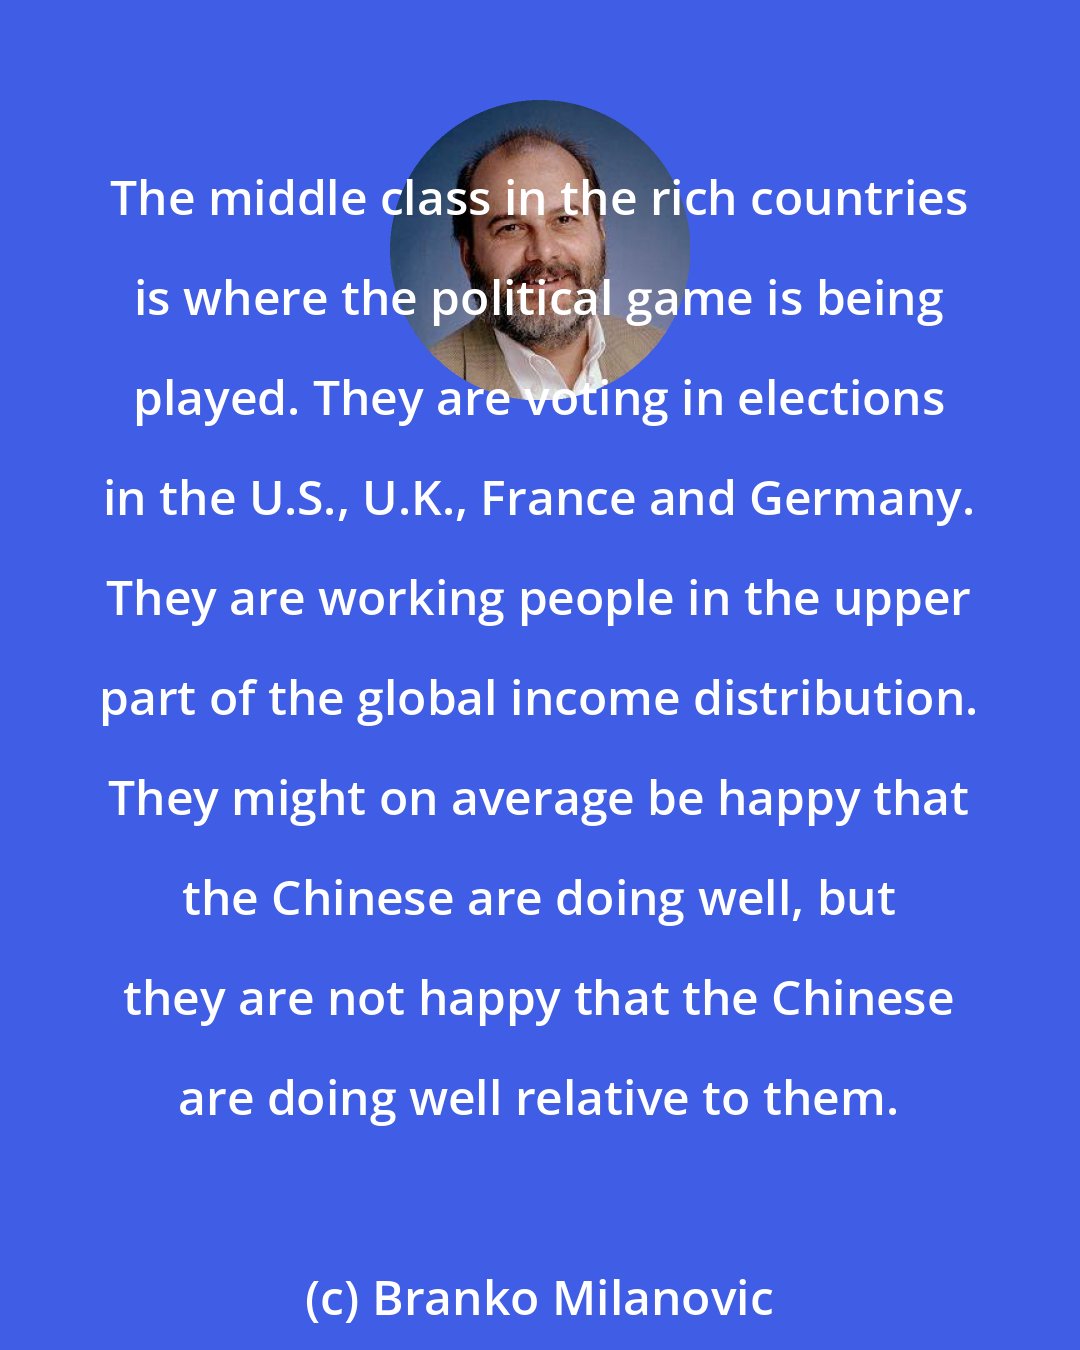 Branko Milanovic: The middle class in the rich countries is where the political game is being played. They are voting in elections in the U.S., U.K., France and Germany. They are working people in the upper part of the global income distribution. They might on average be happy that the Chinese are doing well, but they are not happy that the Chinese are doing well relative to them.